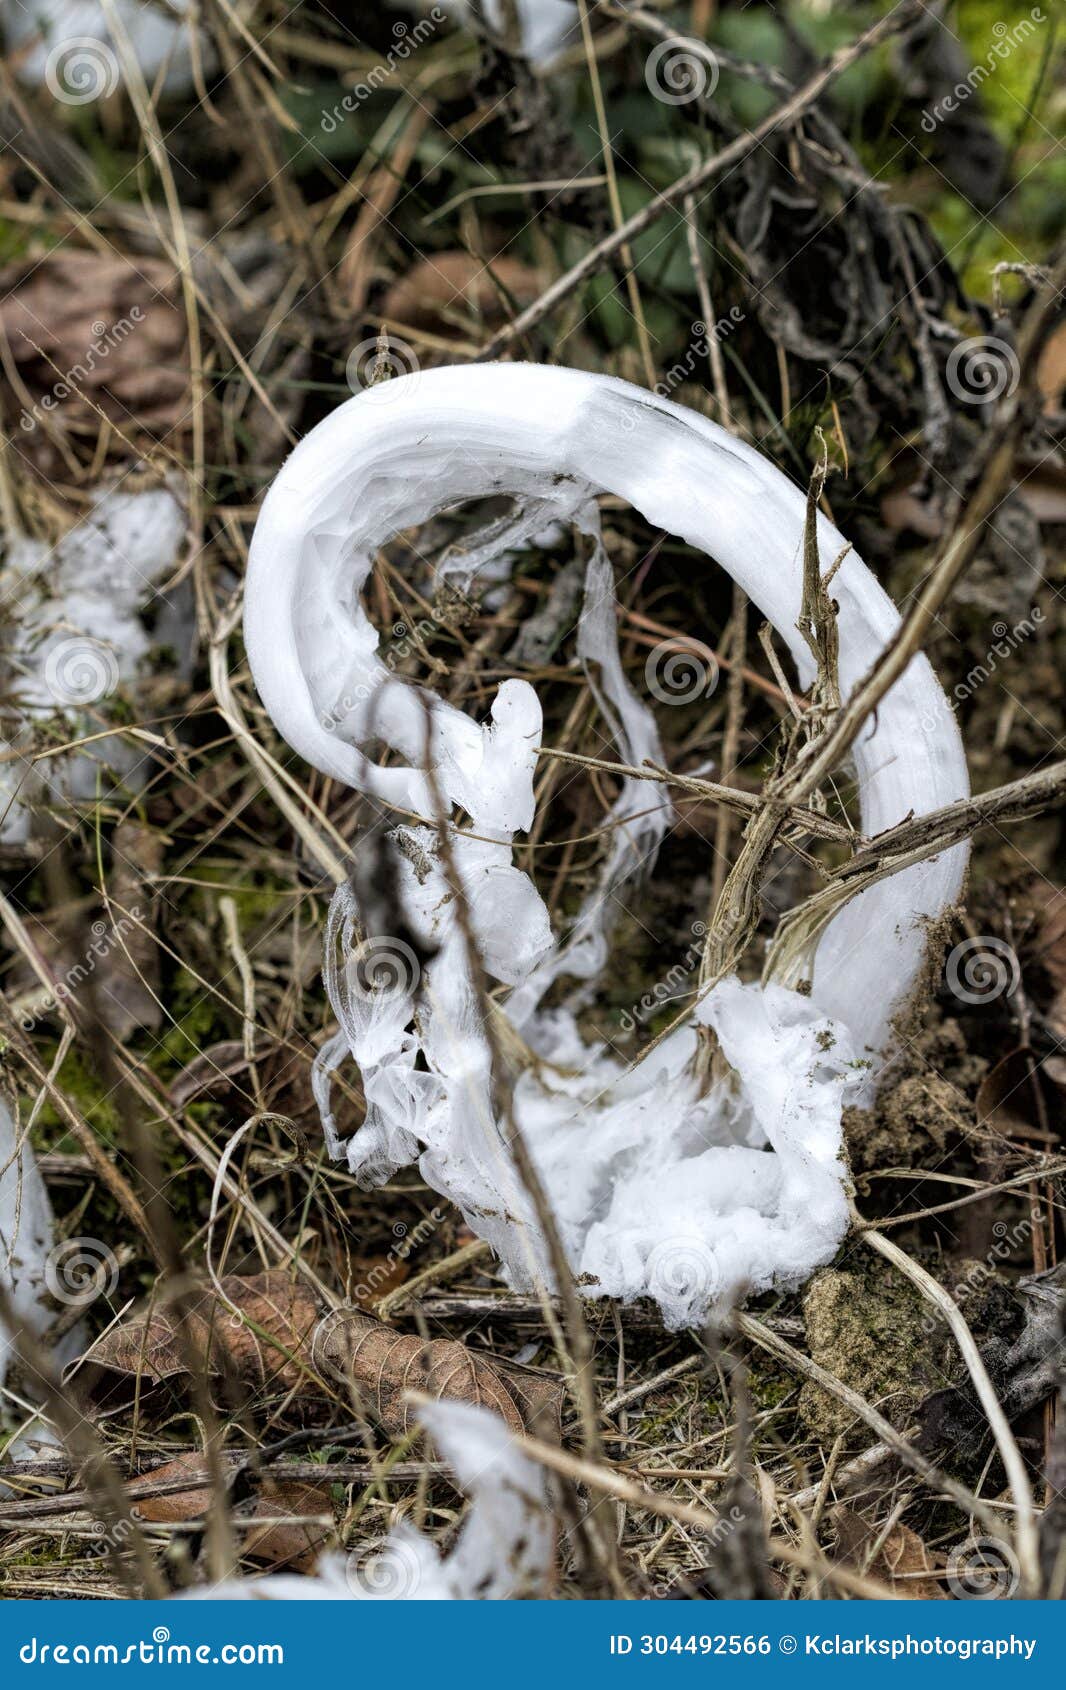 unusual rare frost flowers - ice flowers - ice fringes or filaments